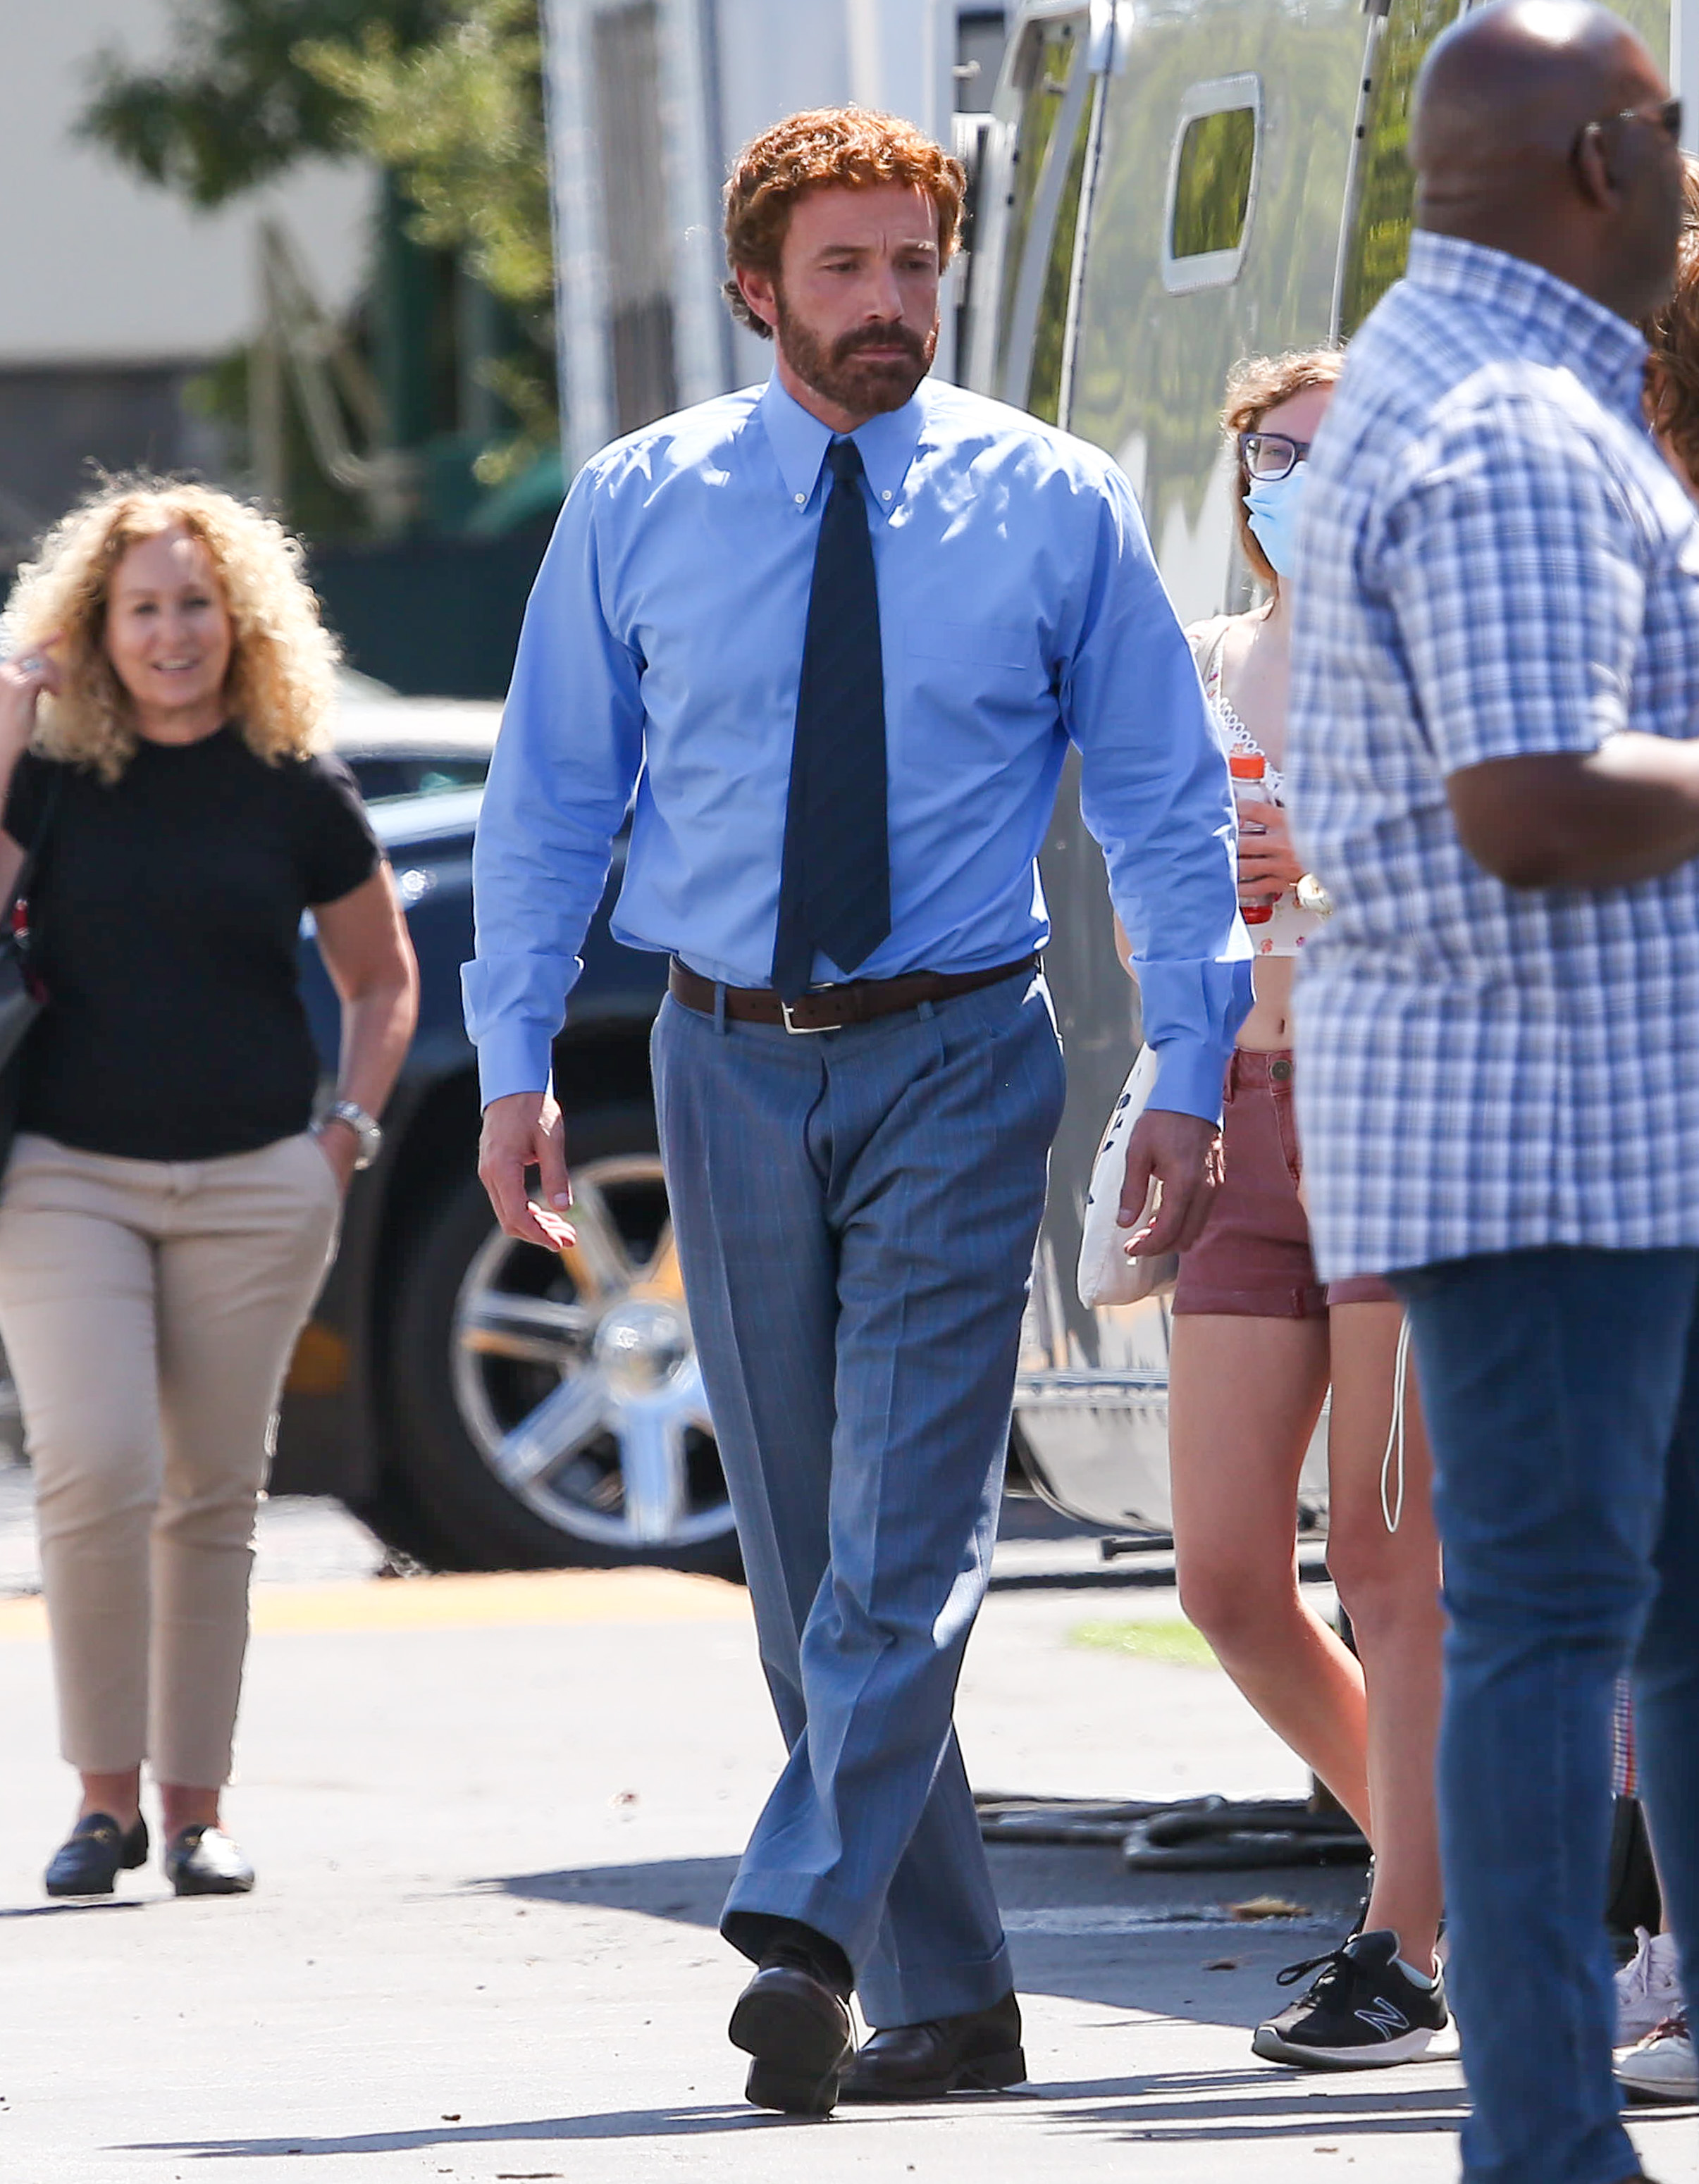 Ben Affleck spotted out while filming "Air" in Los Angeles, California on July 5, 2022 | Source: Getty Images